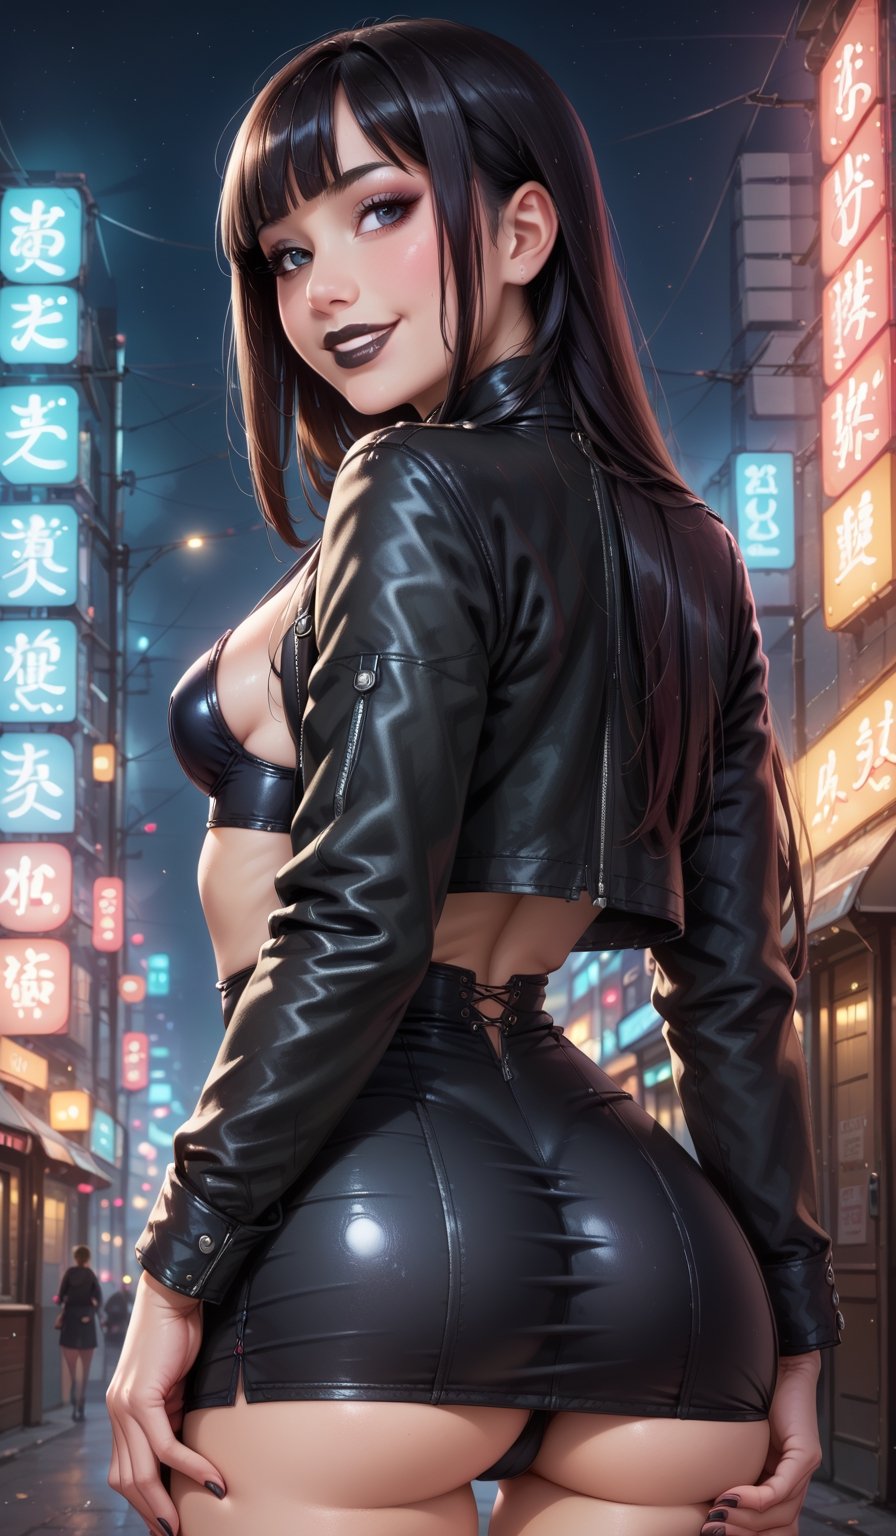 score_9, score_8_up, score_7_up, high quality, (1girl, black hair, very long hair, hime cut, black makeup, black lips, goth, Short biker jacket, (((small short miniskirt))), thick, thigh, thick body, thick thigh, rear view, sexy looking back, suggestive look, smile, close mouth, long closed black coat, shiny body, small breasts, low cut bustier), dark futuristic streets, pink and blue neon lights, look to viewer